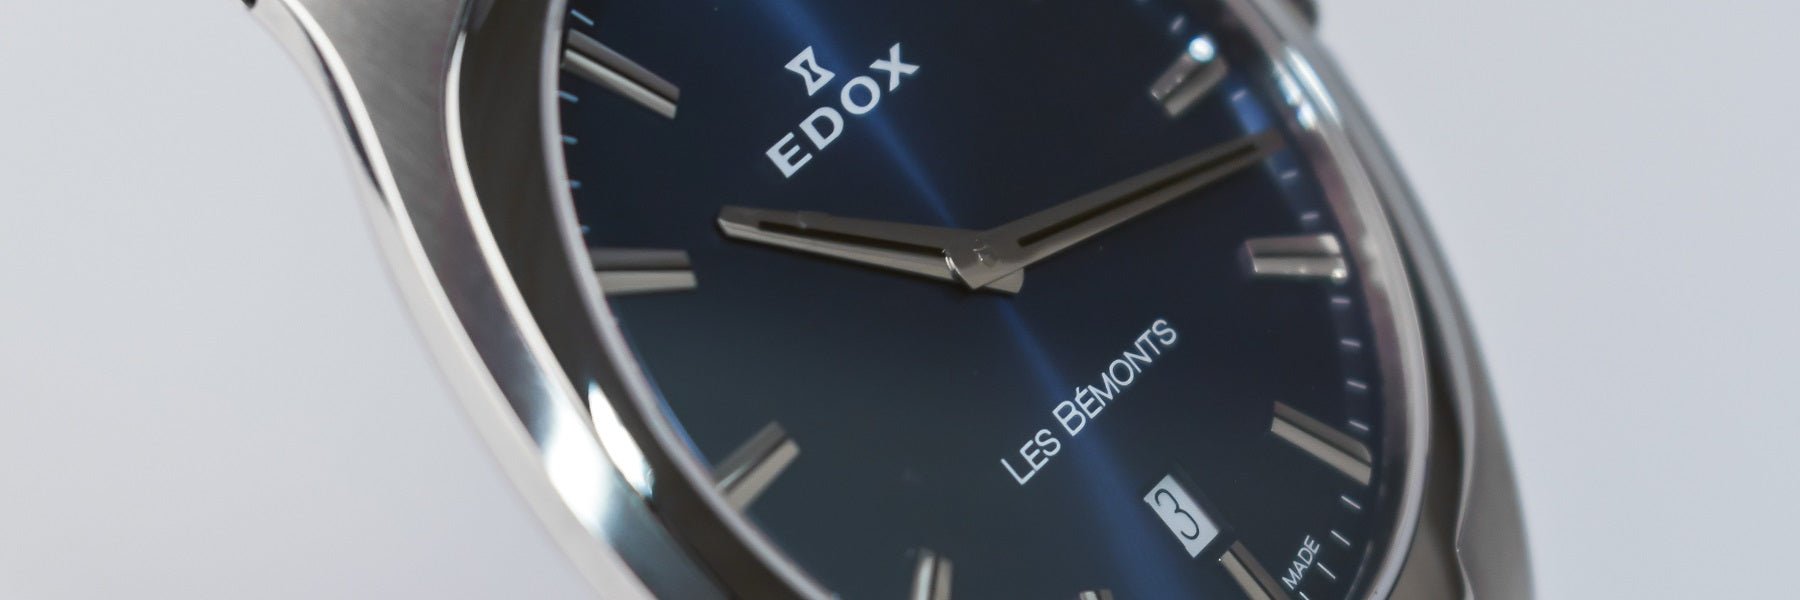 Edox Les Bémonts Watches - Style and Elegance